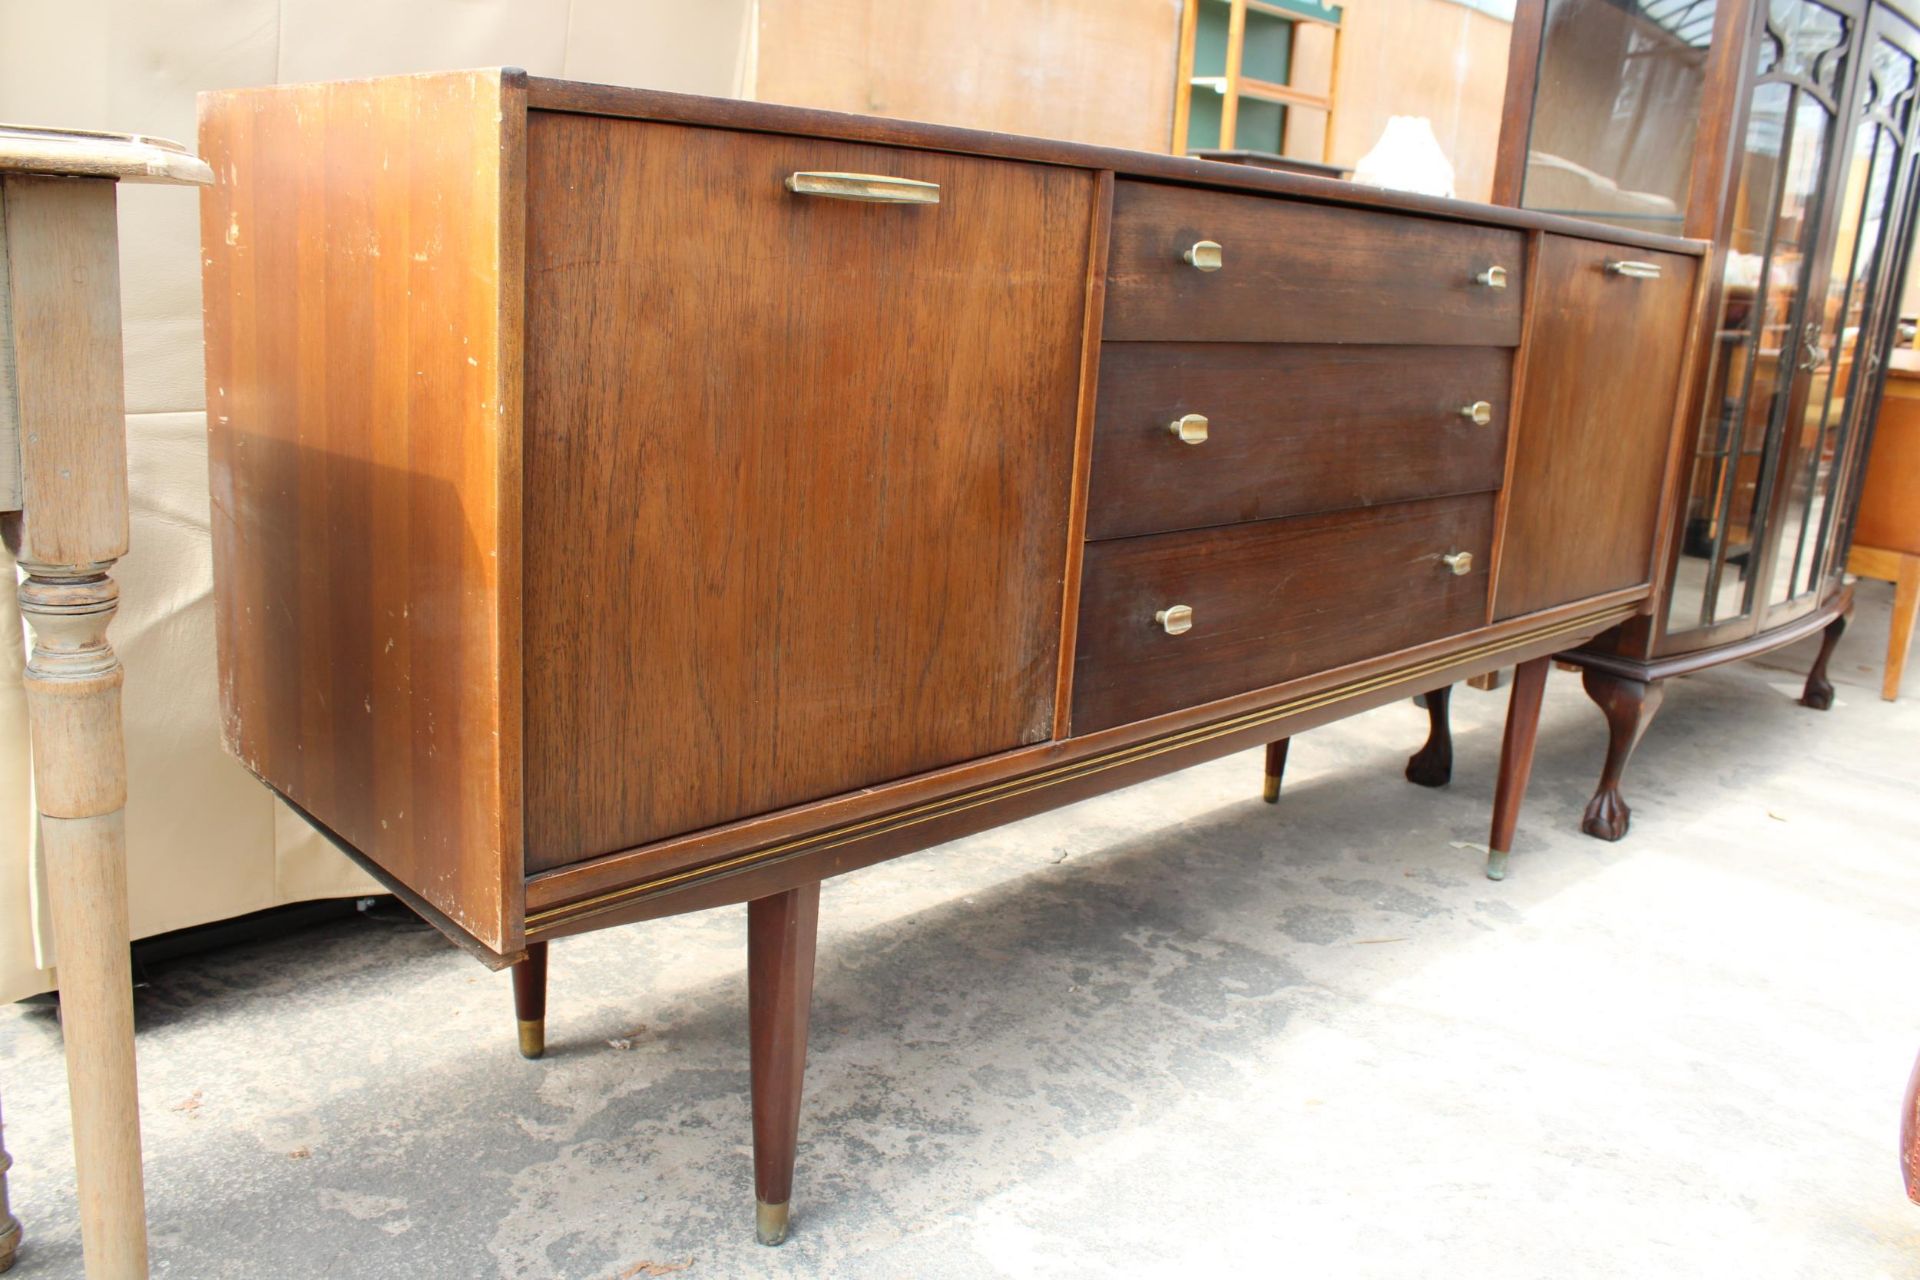 A RETRO TEAK SIDEBOARD ENCLOSING THREE DRAWERS AND TWO DROP-DOWN CUPBOARDS, 65" WIDE - Image 2 of 4